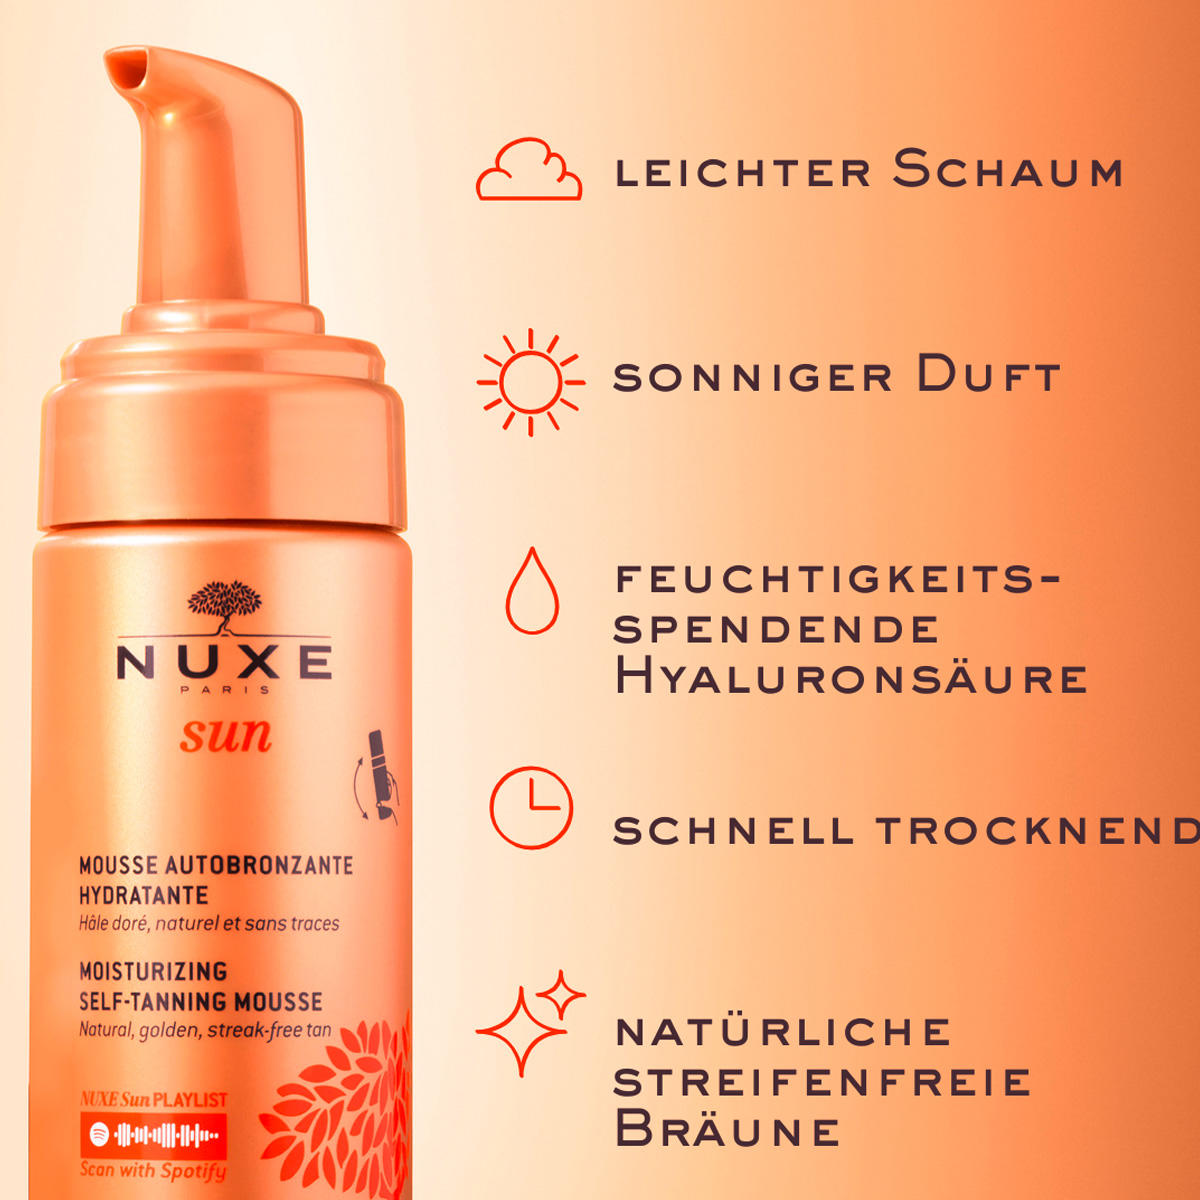 NUXE Sun Hydraterende Zelfbruinende Mousse 150 ml - 3